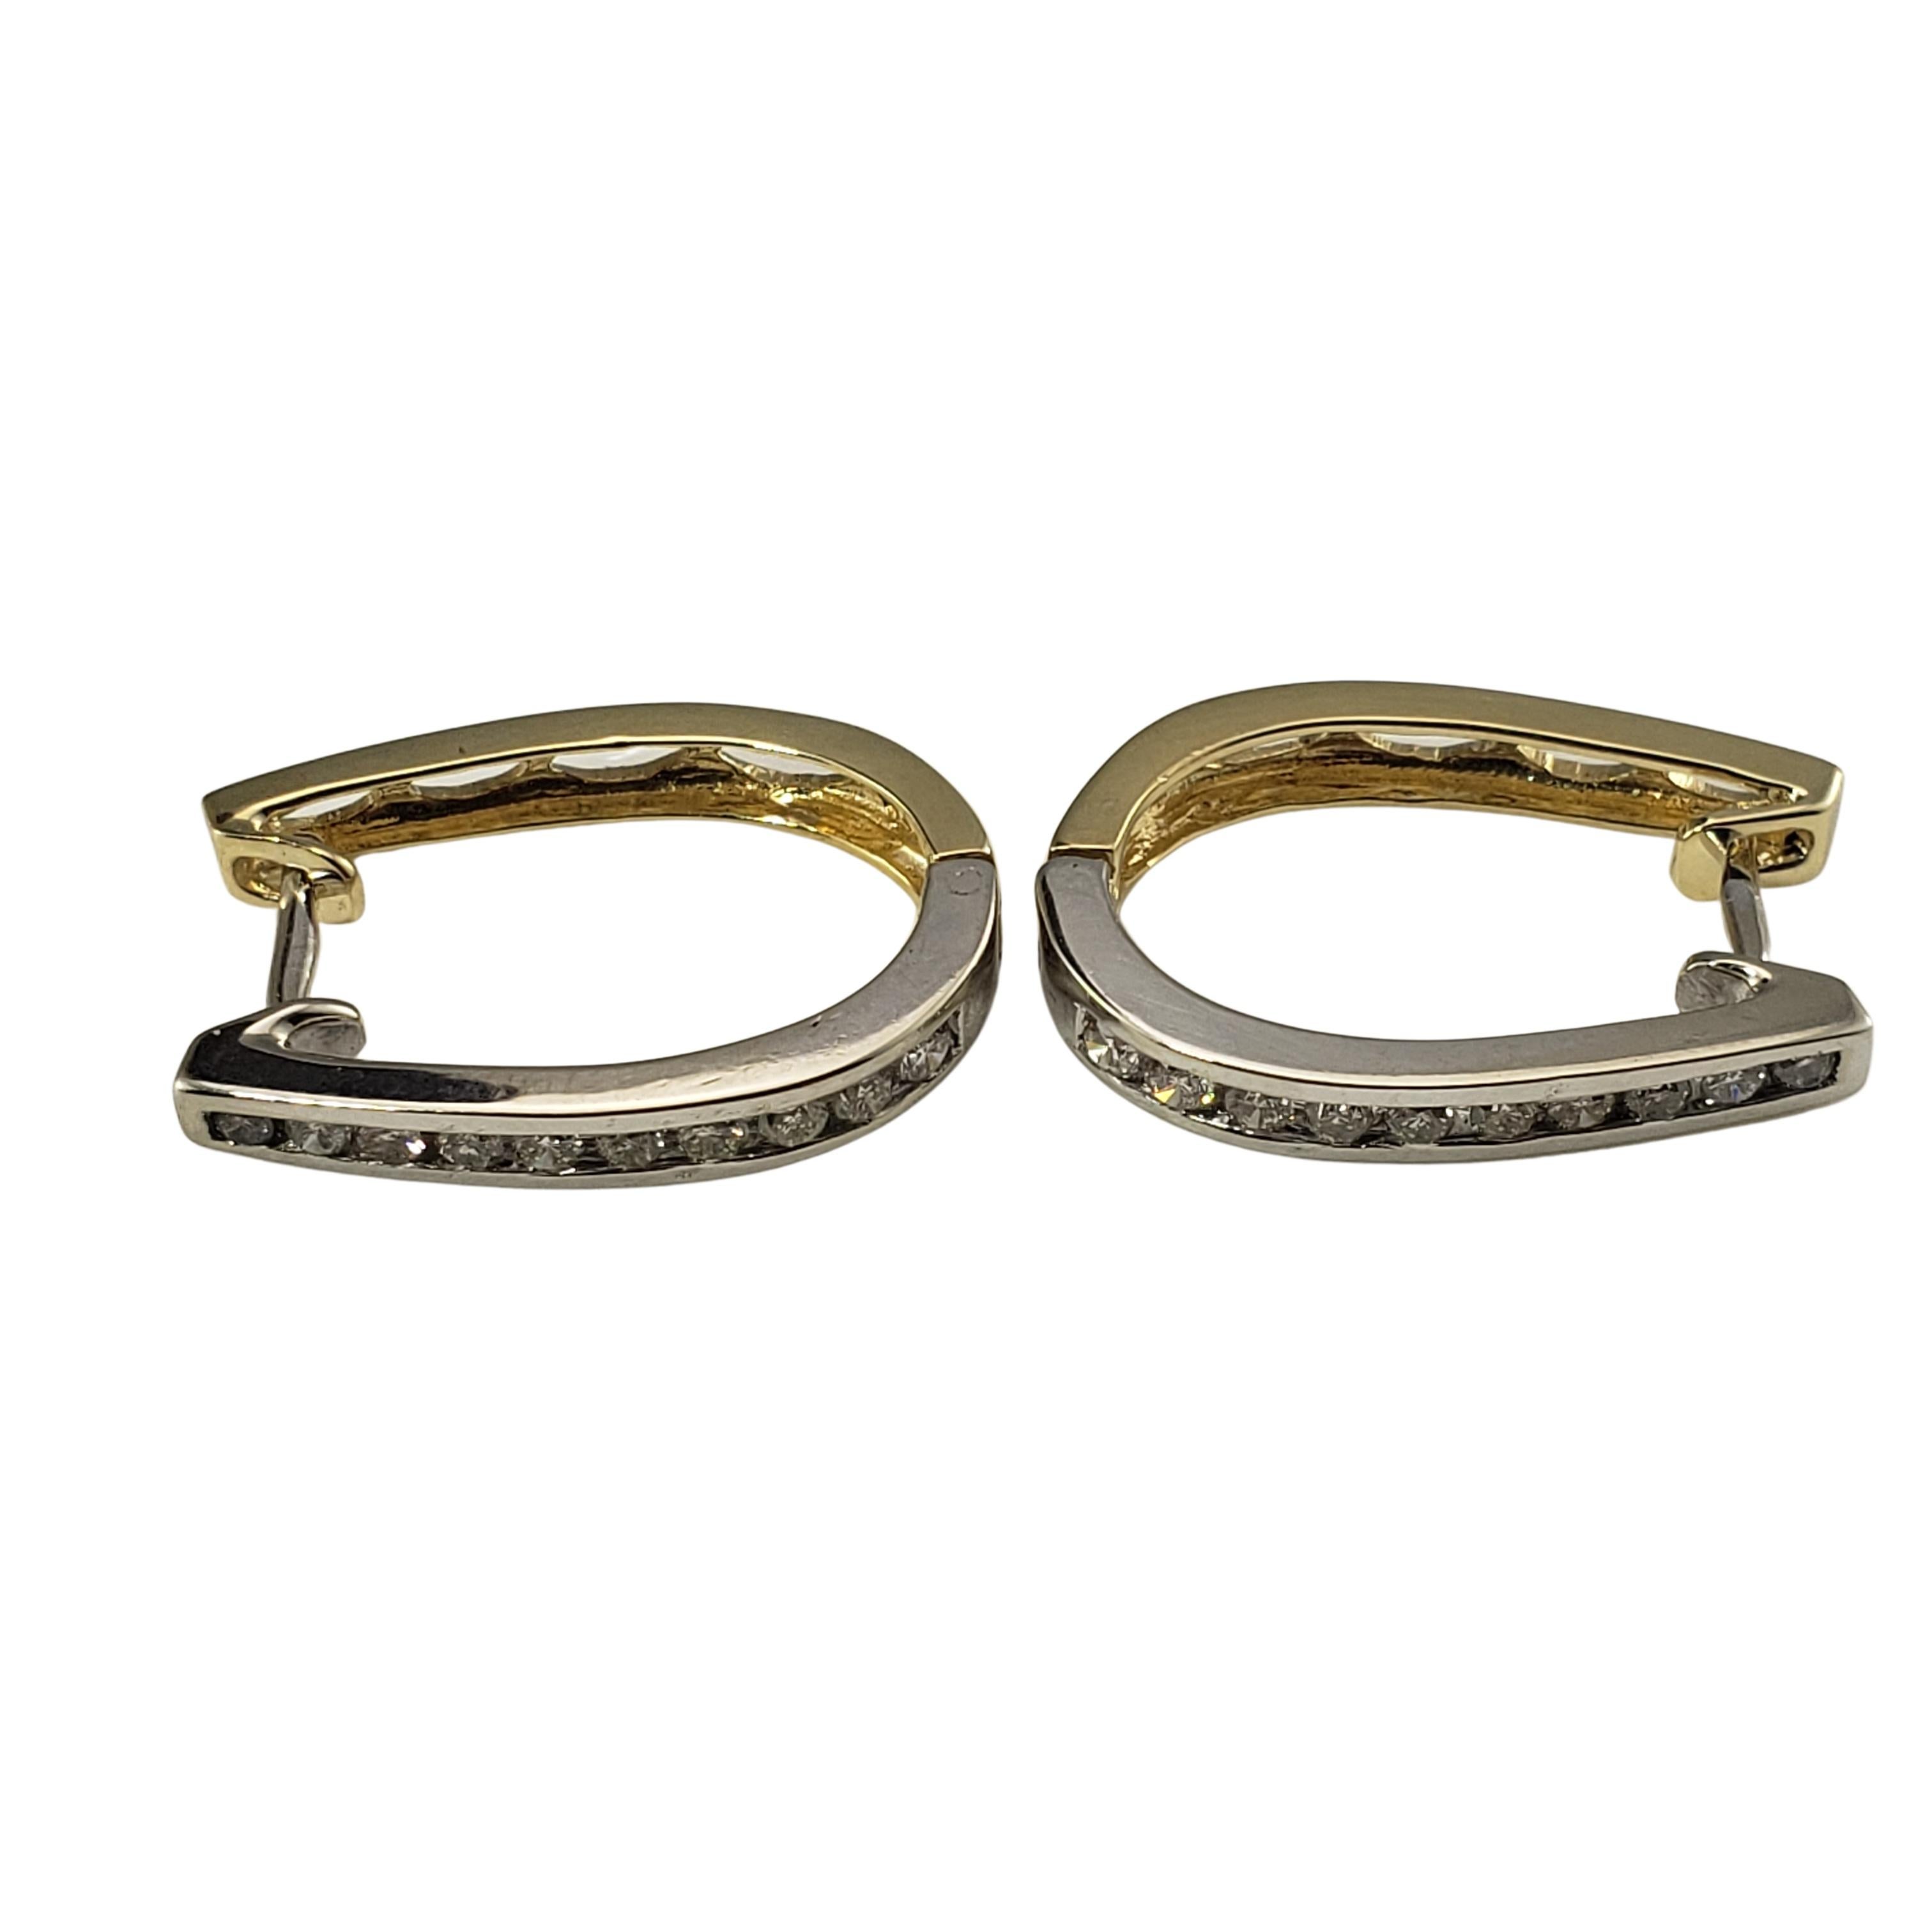 14 Karat White/Yellow Gold and Diamond Hoop Earrings-

These hinged hoop earrings feature ten round brilliant cut diamonds set in classic 14K white and yellow gold.
Front of earrings are white gold, backs are yellow gold.  Width:  3 mm.

Approximate